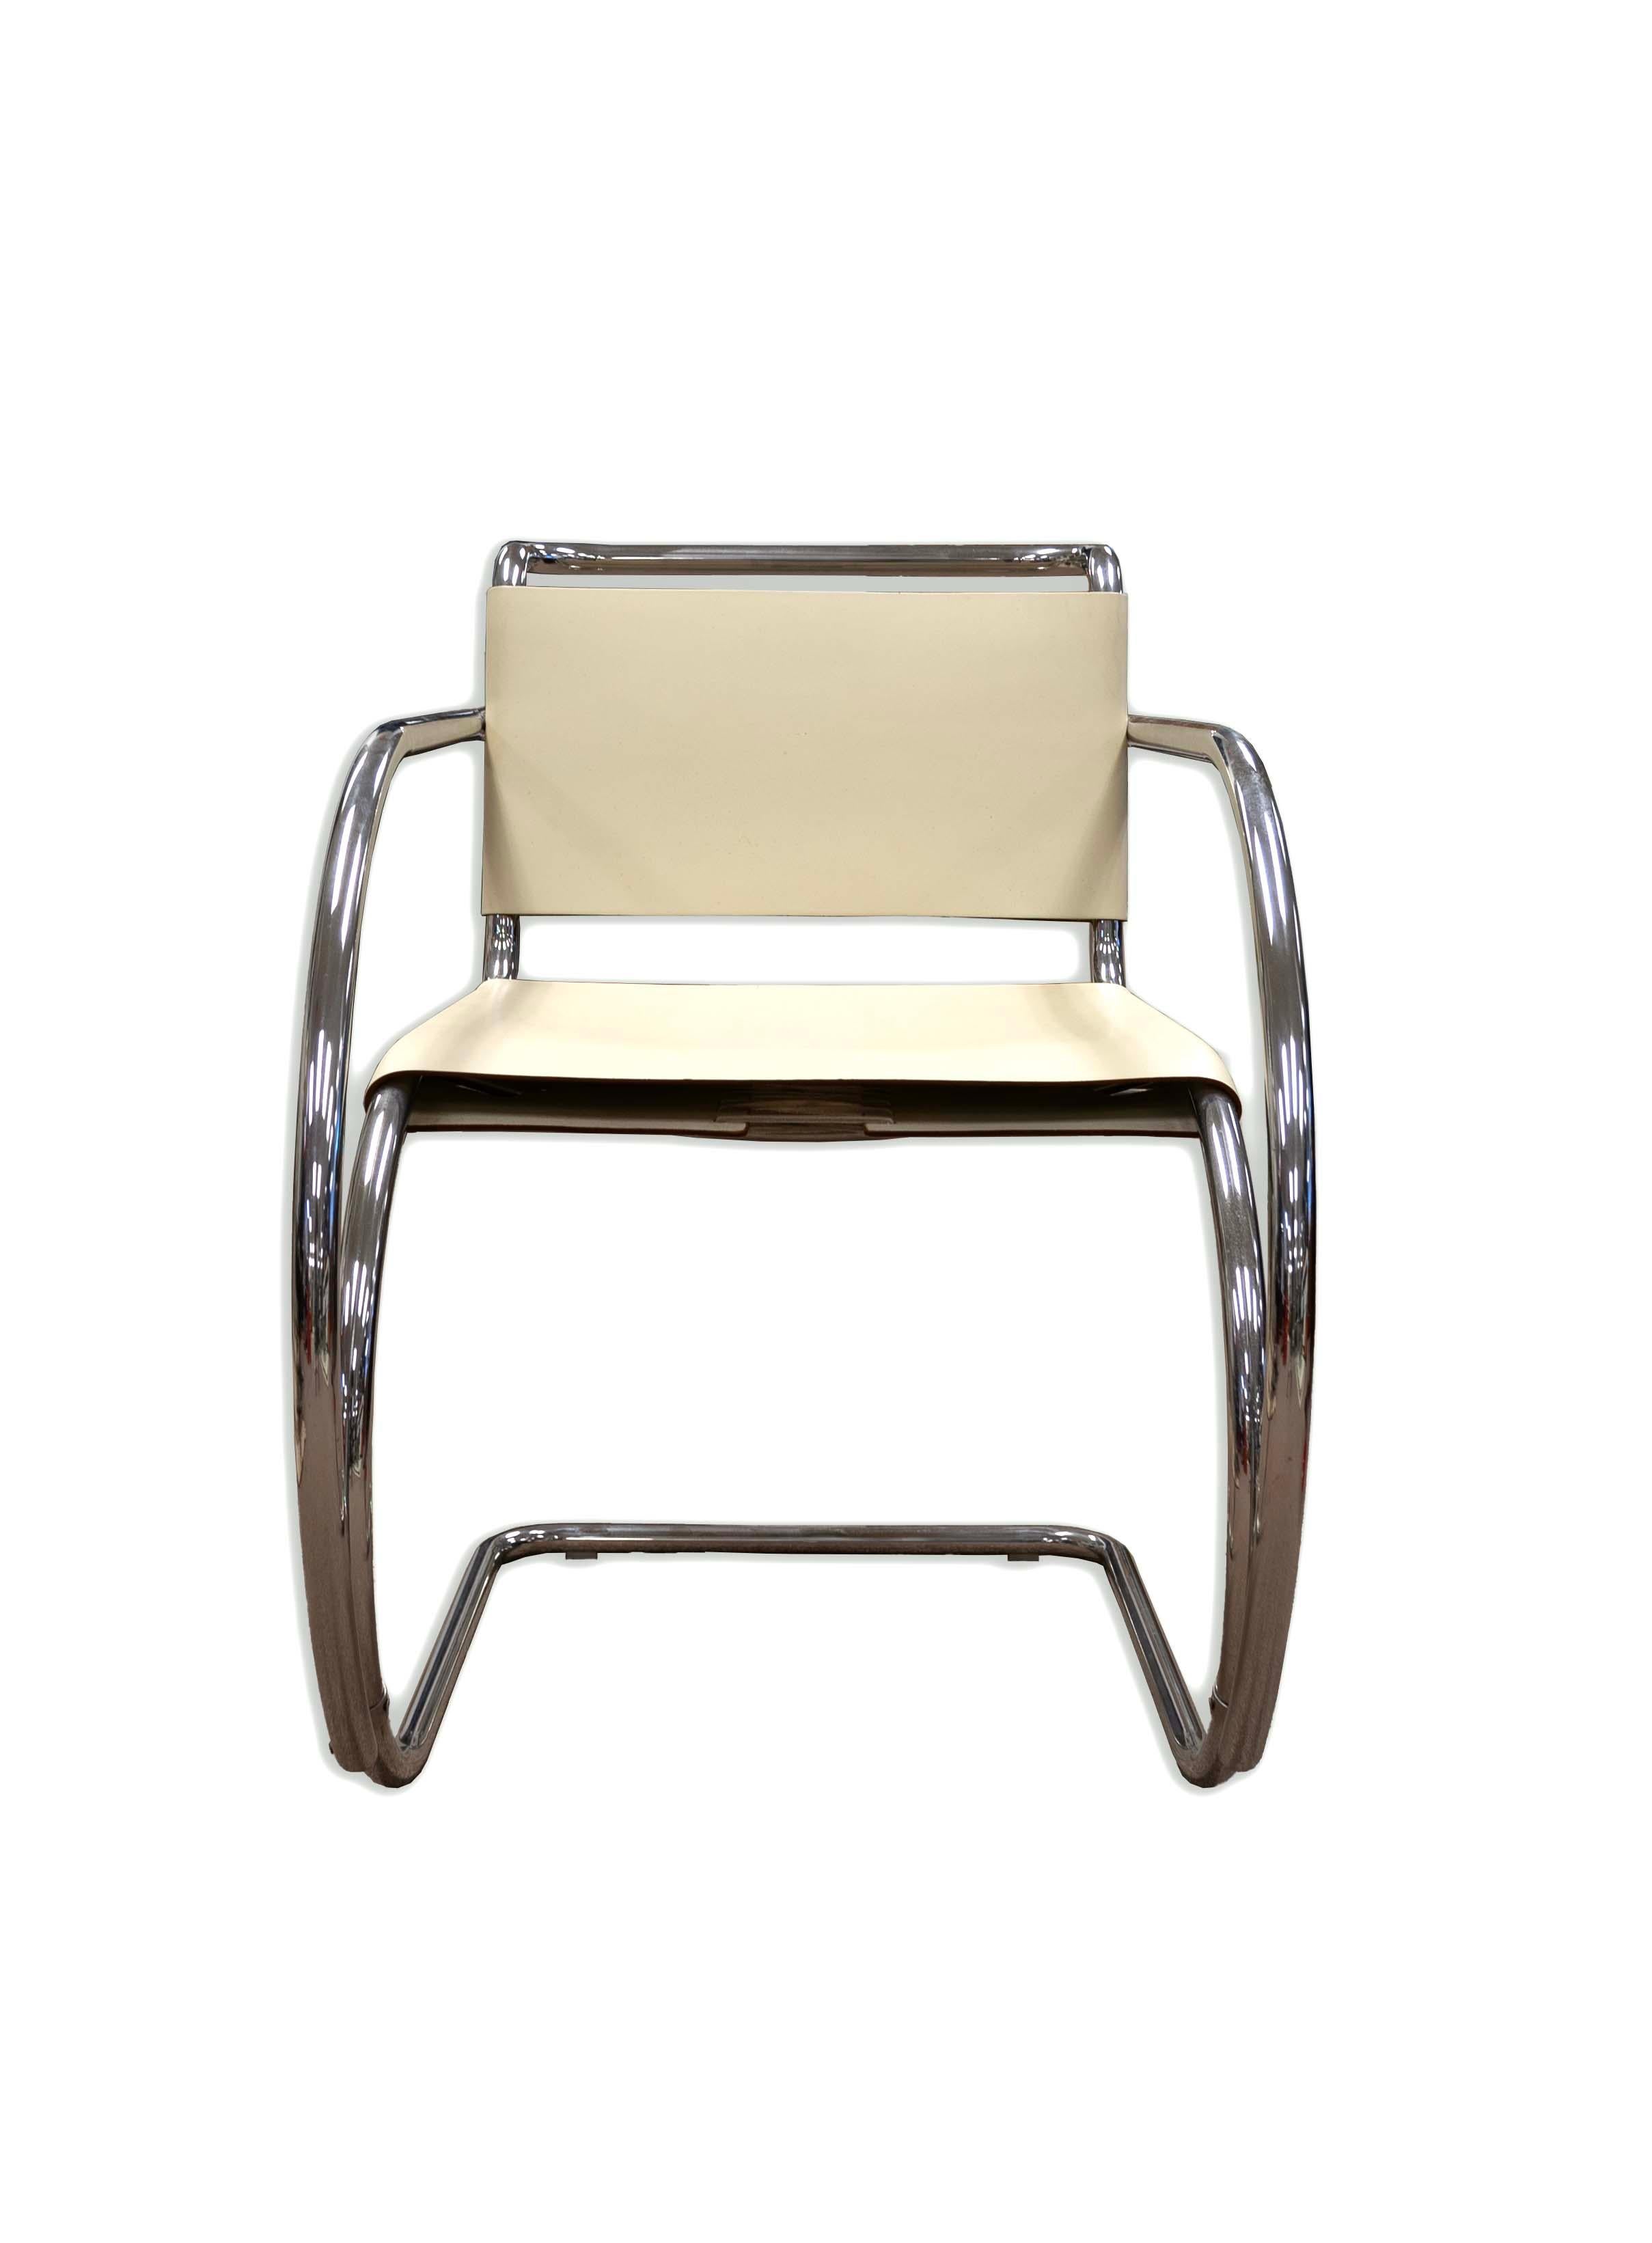 Sleek and timeless, this Mies van der Rohe Tubular Chrome Arm Chair is a masterpiece of Mid-Century Modern design. The chair's graceful curves and reflective chrome frame create an airy feel, while the creamy leather-look upholstery adds a touch of